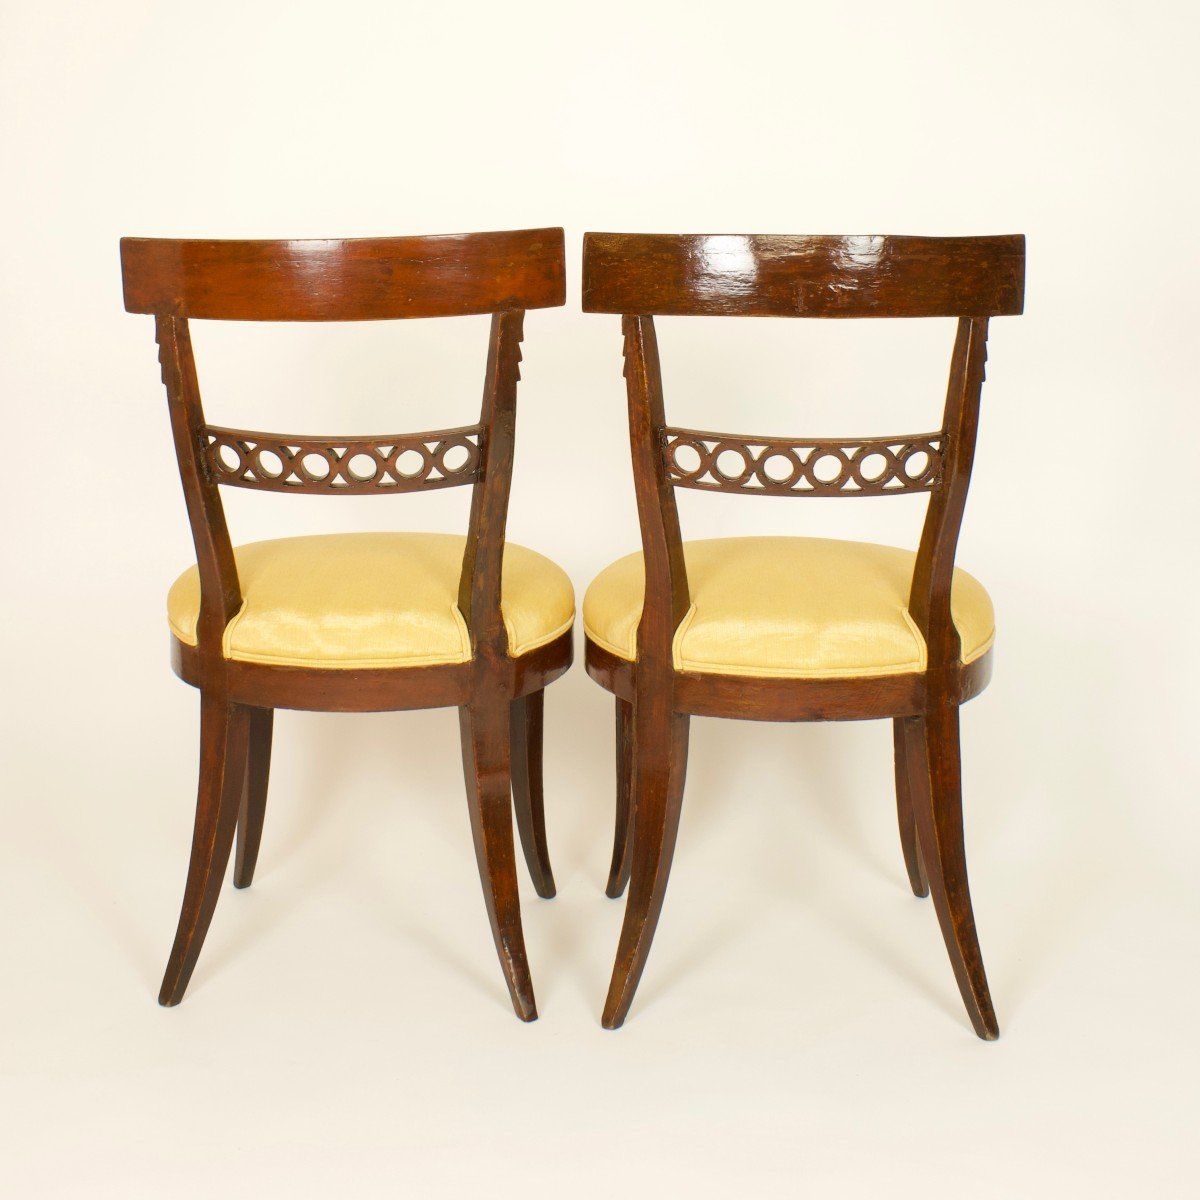 Pair Of Late 18th Century Italian Neoclassical Klismos Style Side Chairs-photo-2